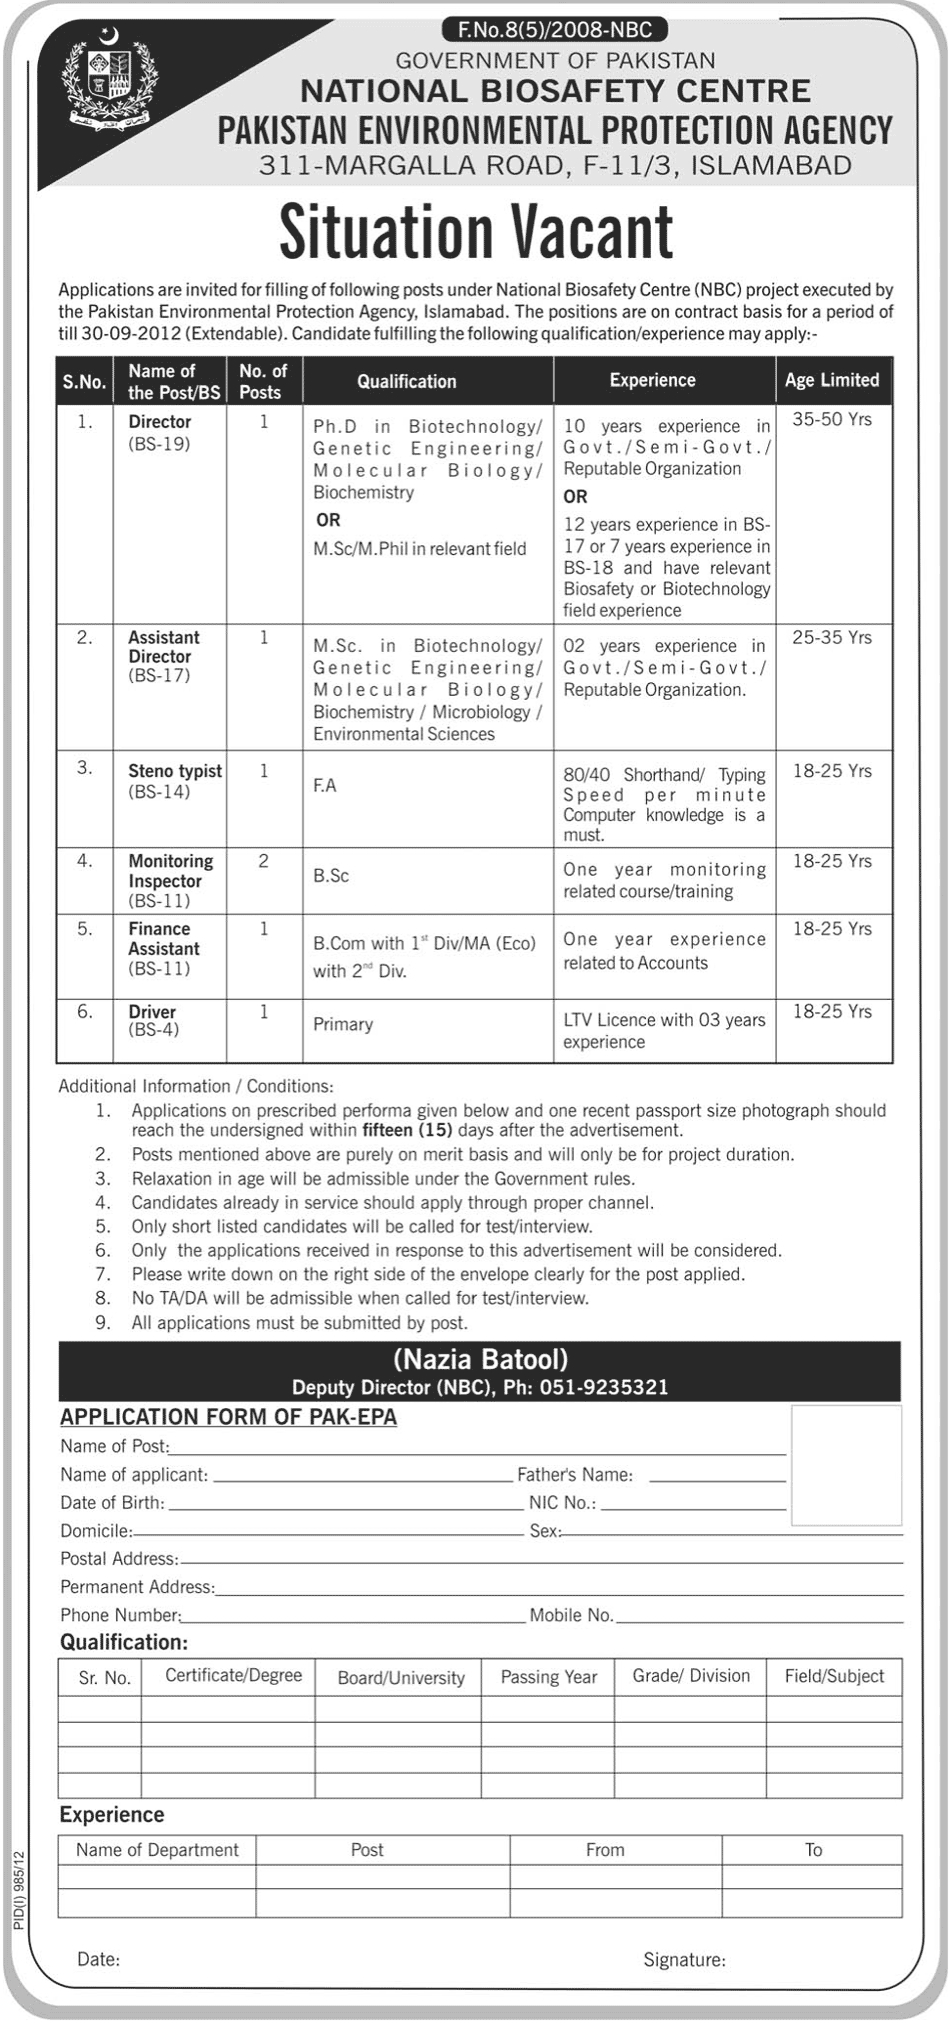 Pakistan Environmental Protection Agency (National Biosafety Centre) Jobs (Government Job)